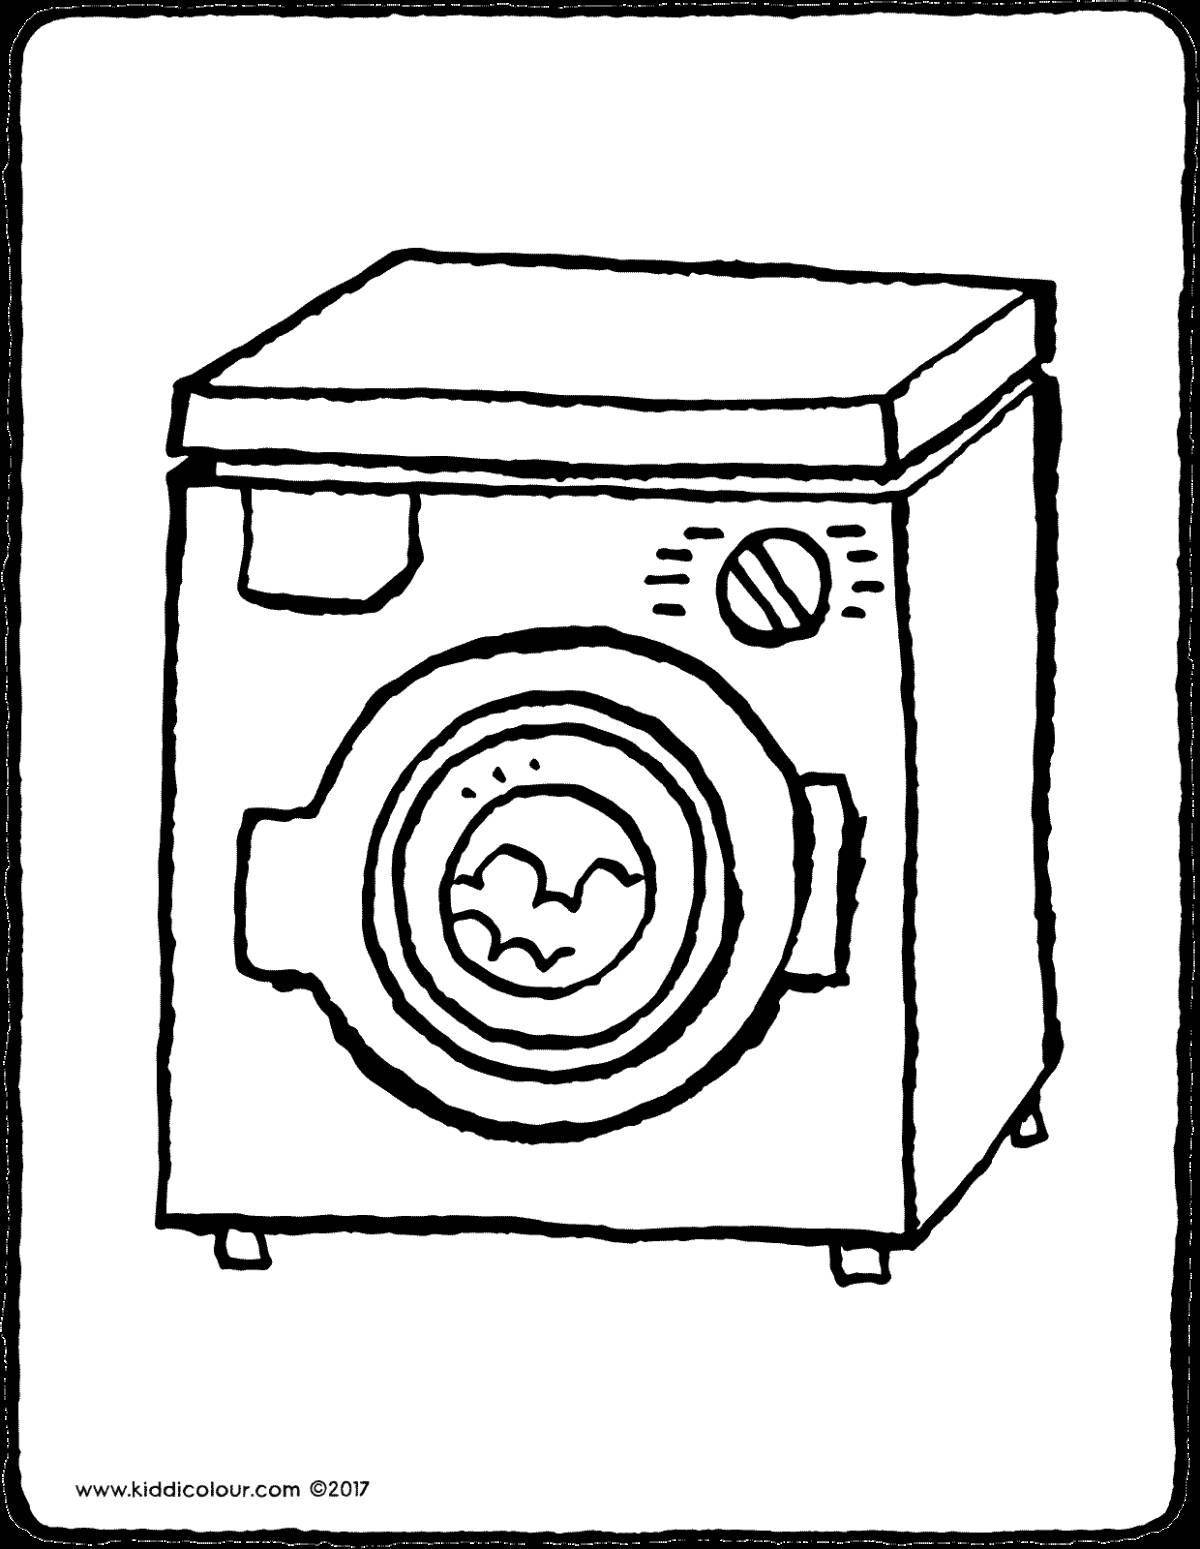 Outstanding washing machine coloring page for kids